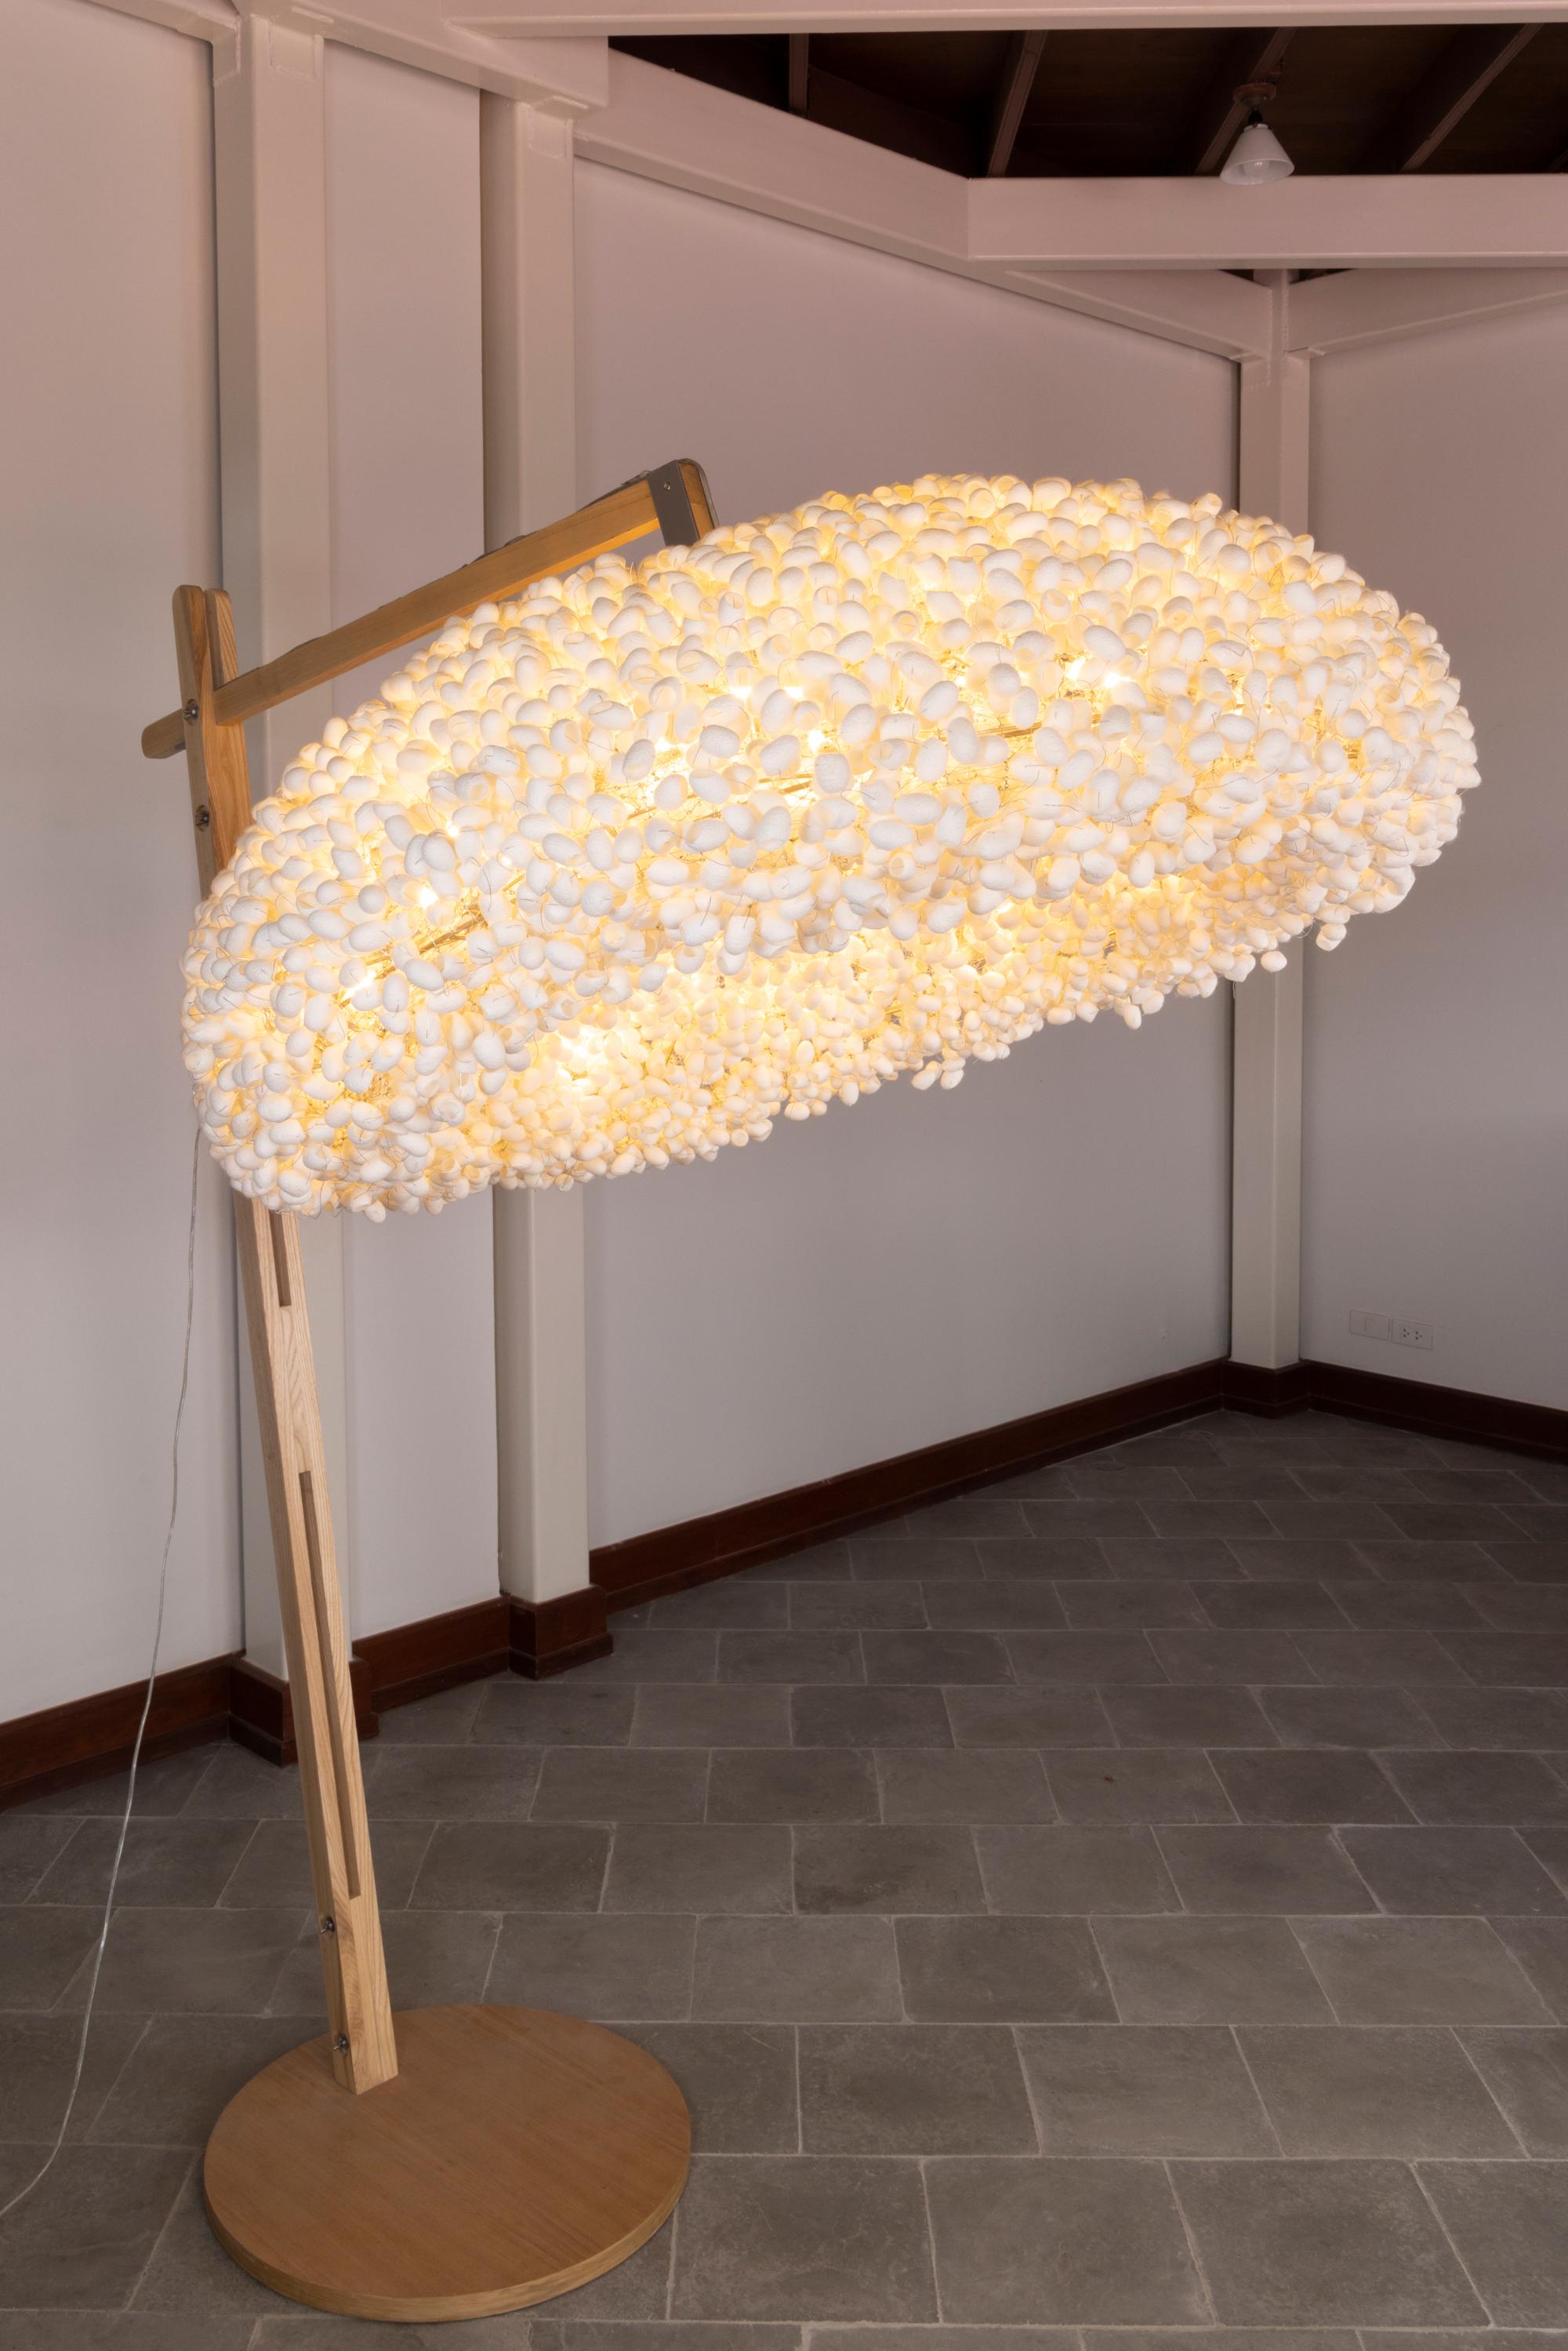 Escape Floor Light by Ango, Handcrafted Silk Cocoon Shelter Floor lamp
Escape floor light with ash wooden base is developed from the series of five Transceiver Spaces of Gwangju Design Biennale 2017, South Korea. Medium is the silk cocoon, each one